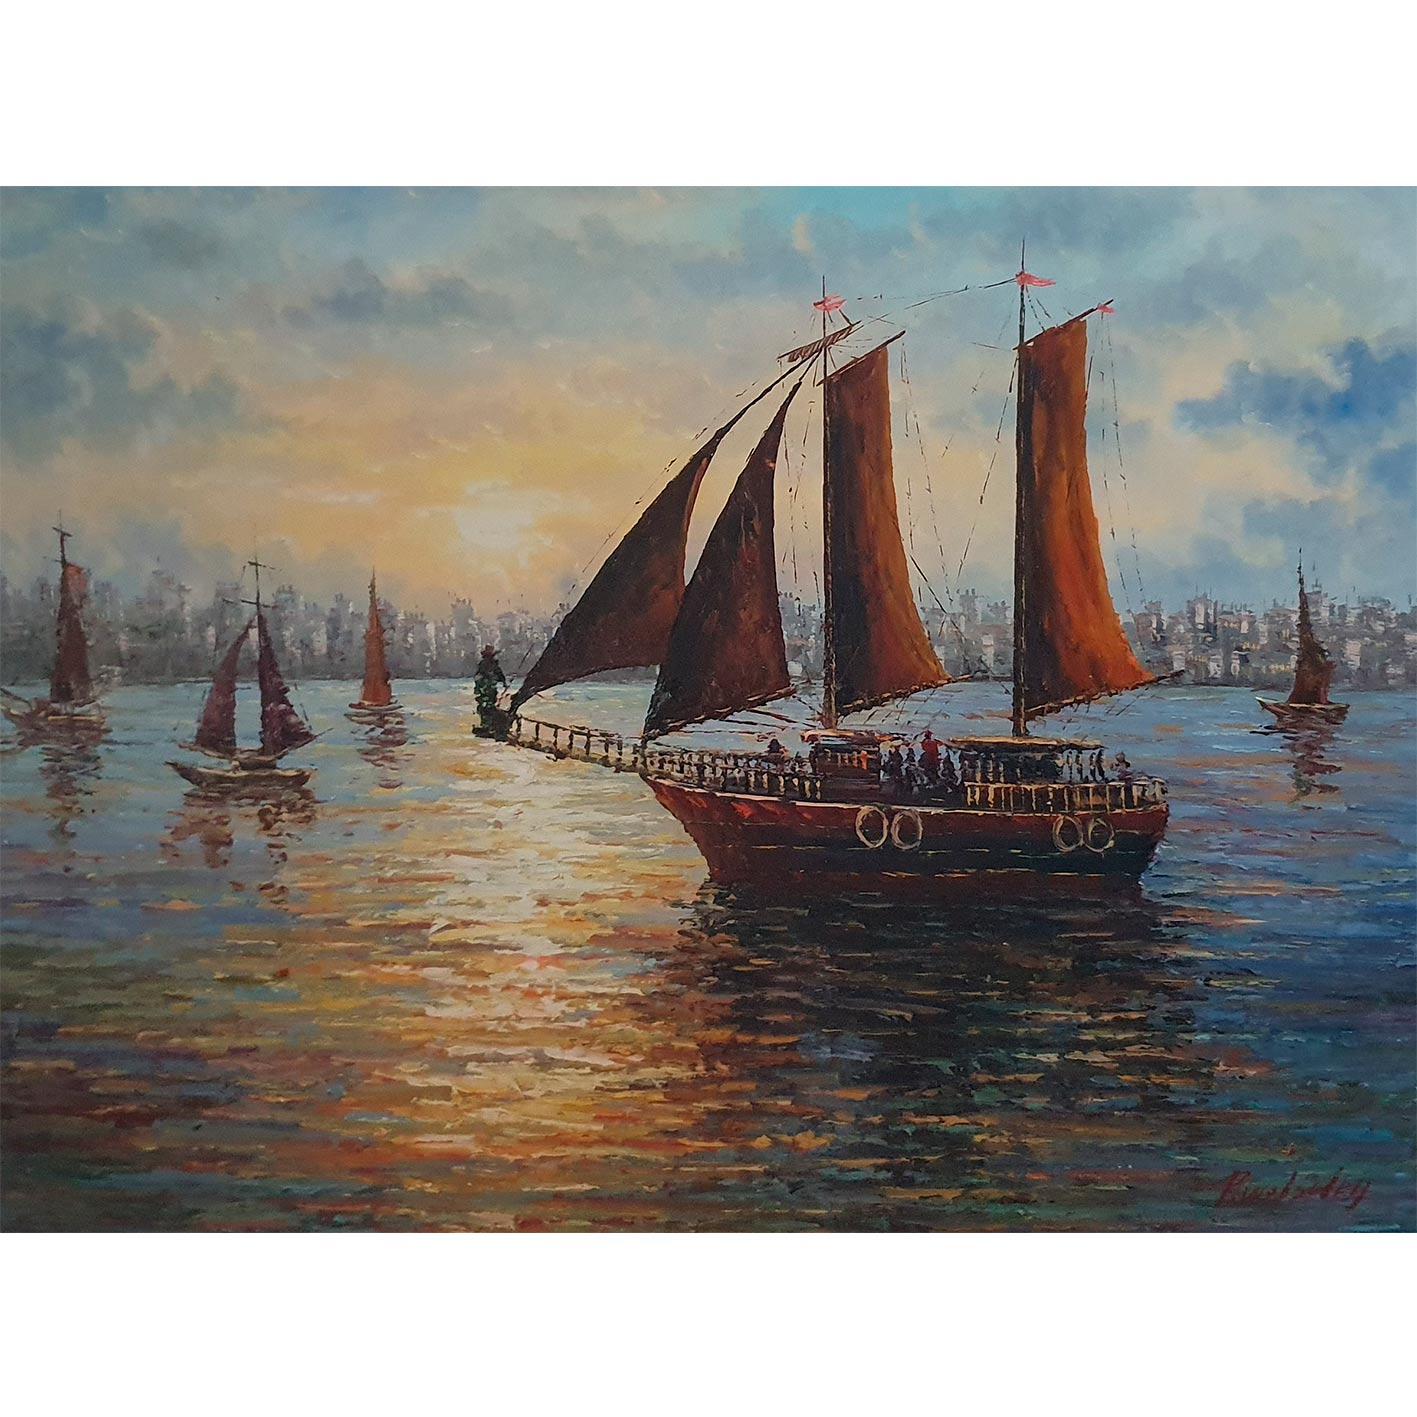 Greatness Boat Painting 120x90 cm